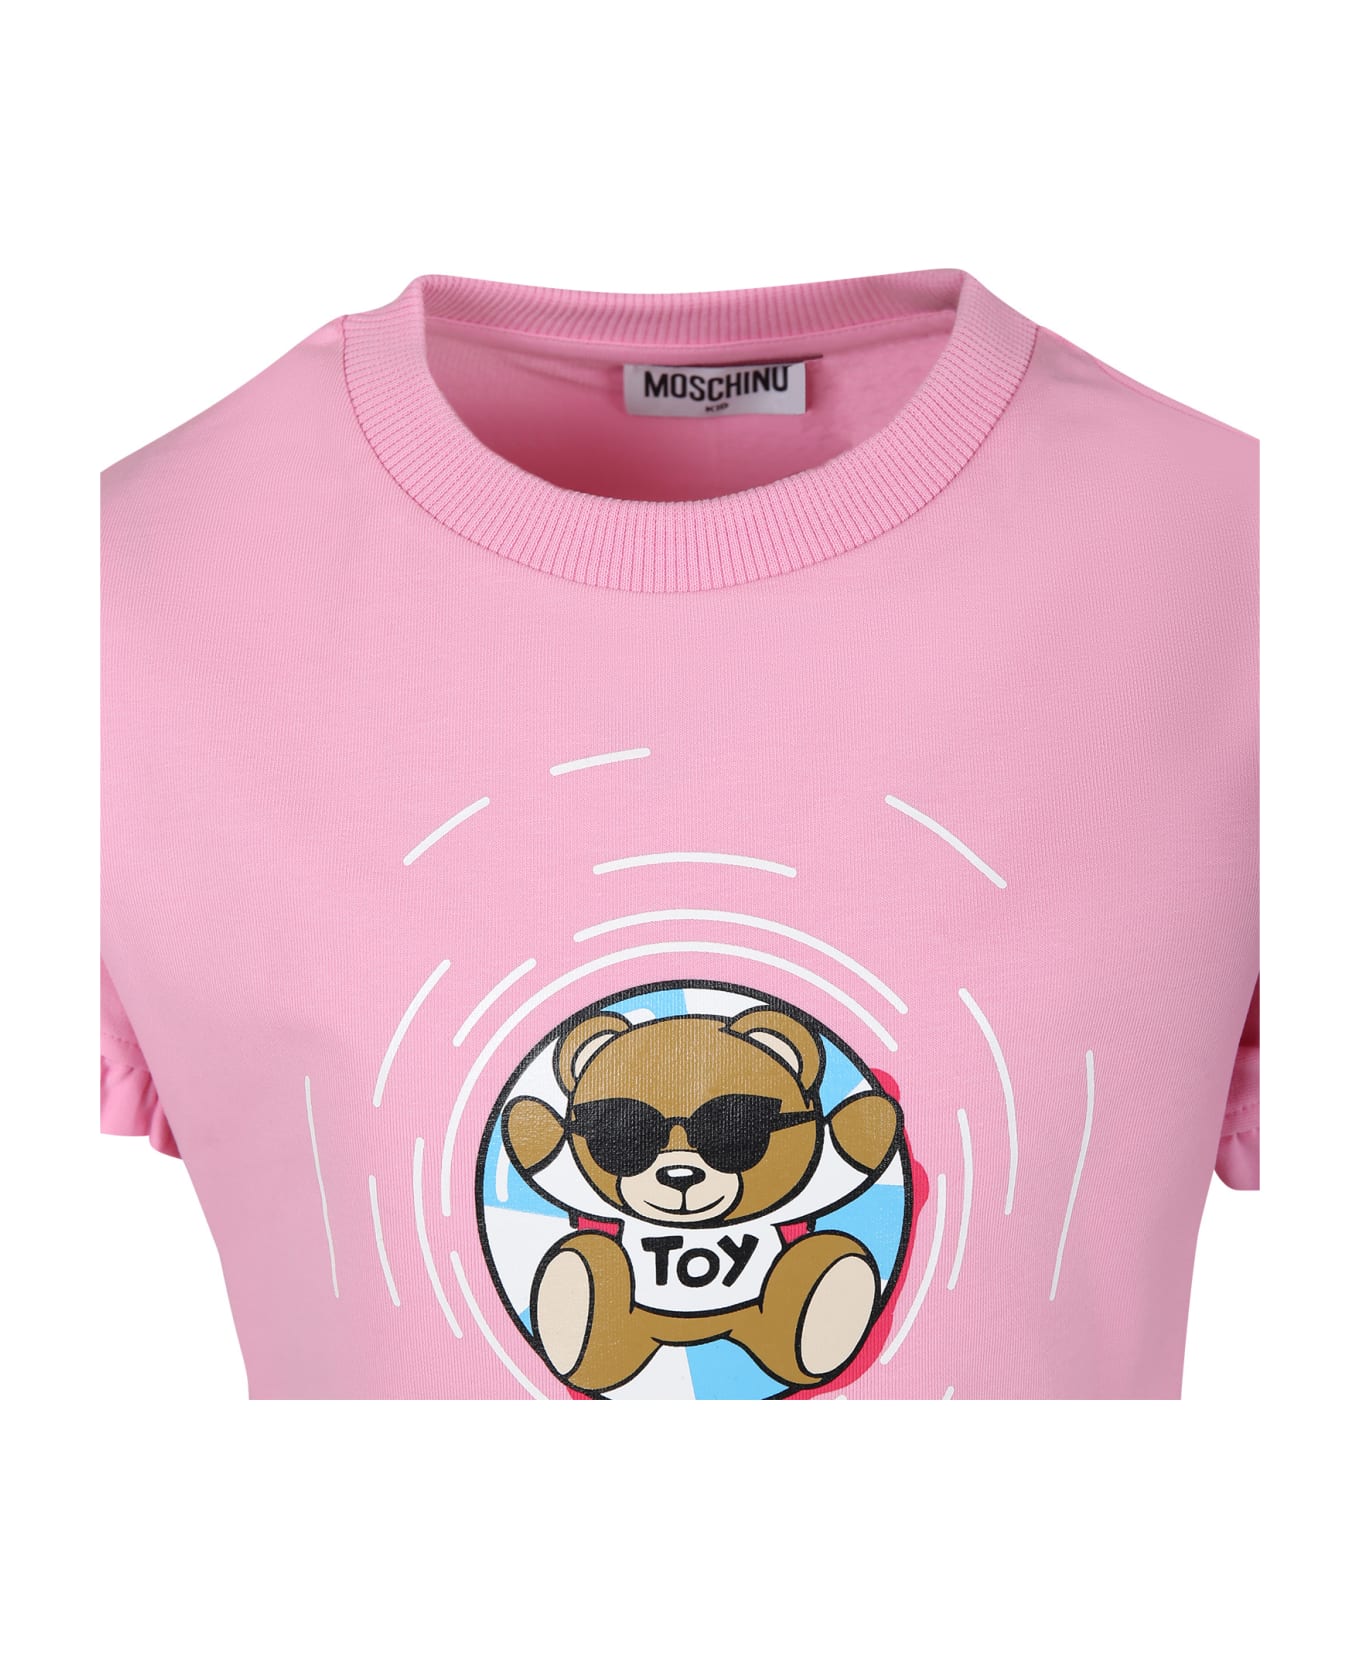 Moschino Pink Dress For Girl With Multicolor Print And Teddy Bear - Pink